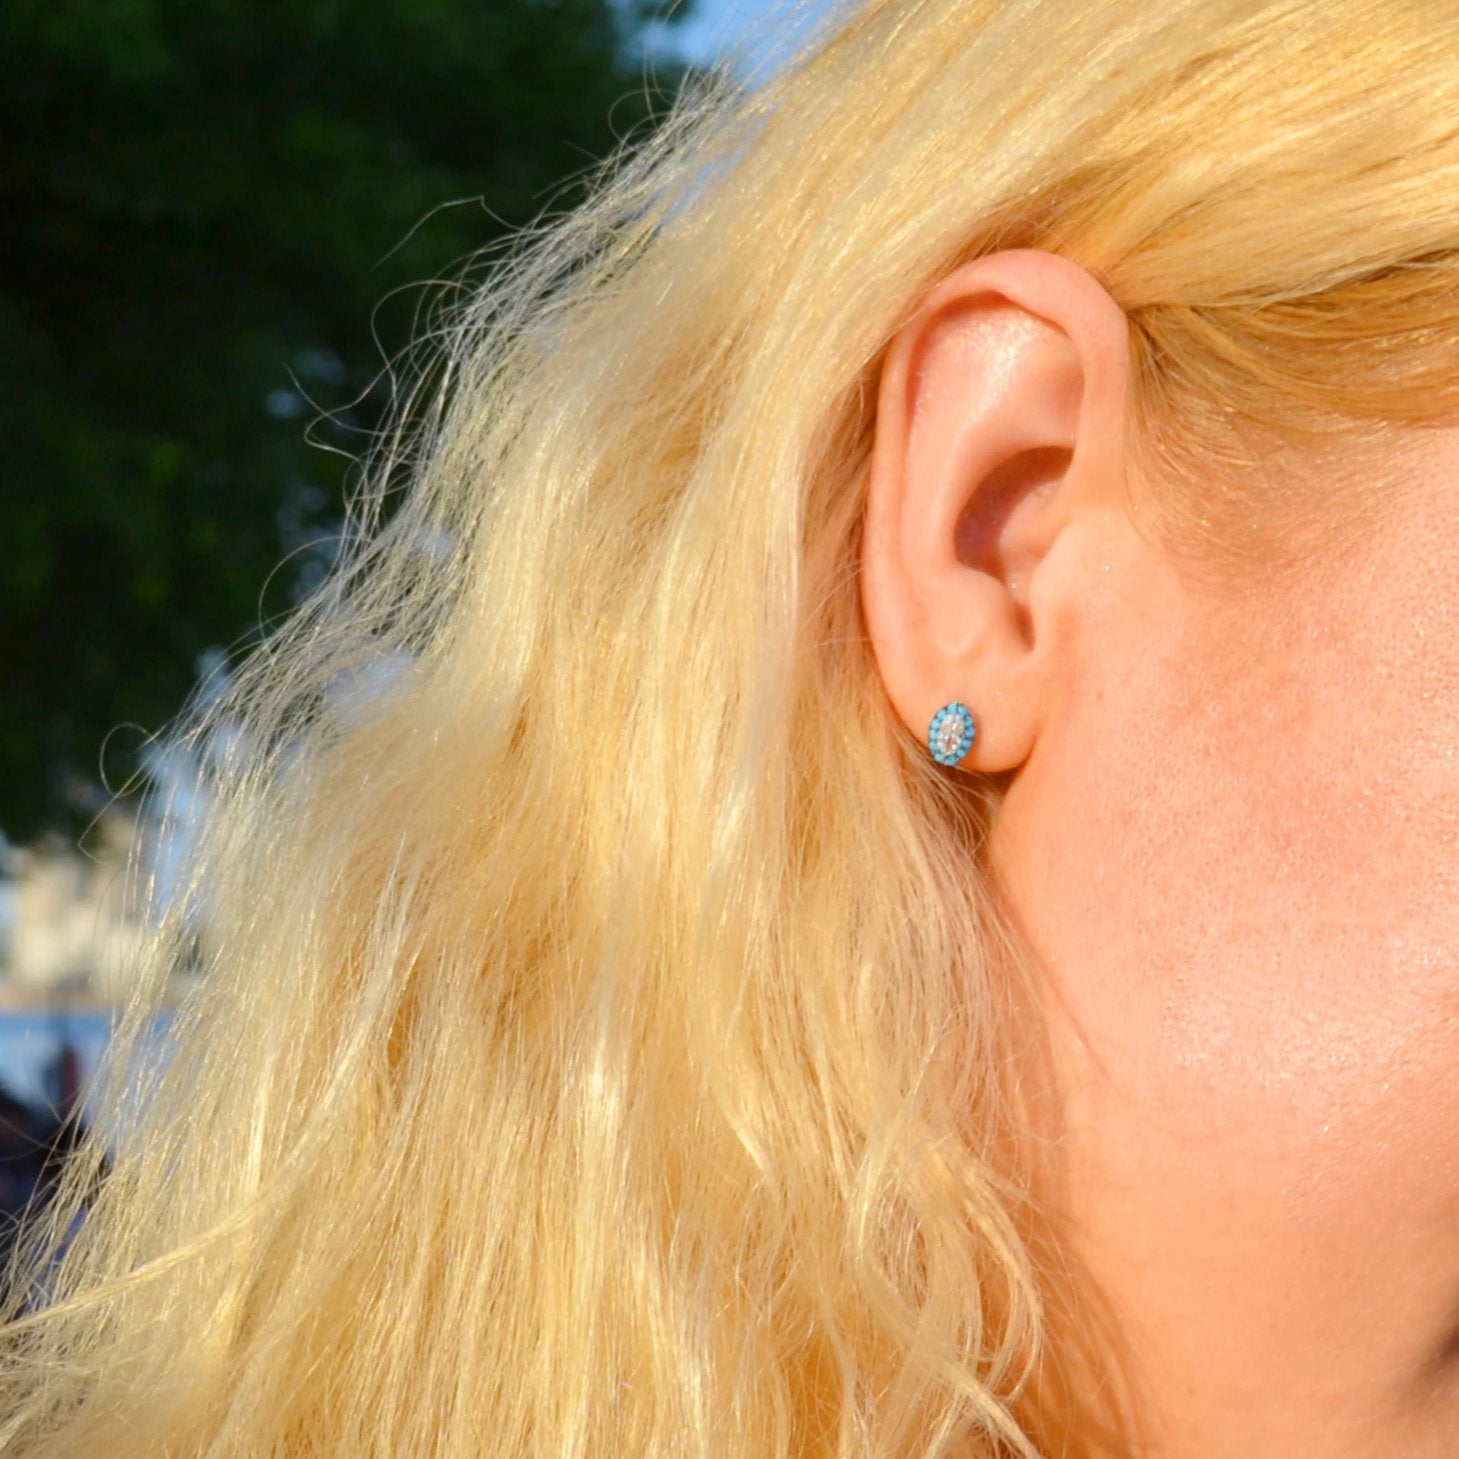 The Mes Me Rize Turquoise Earrings